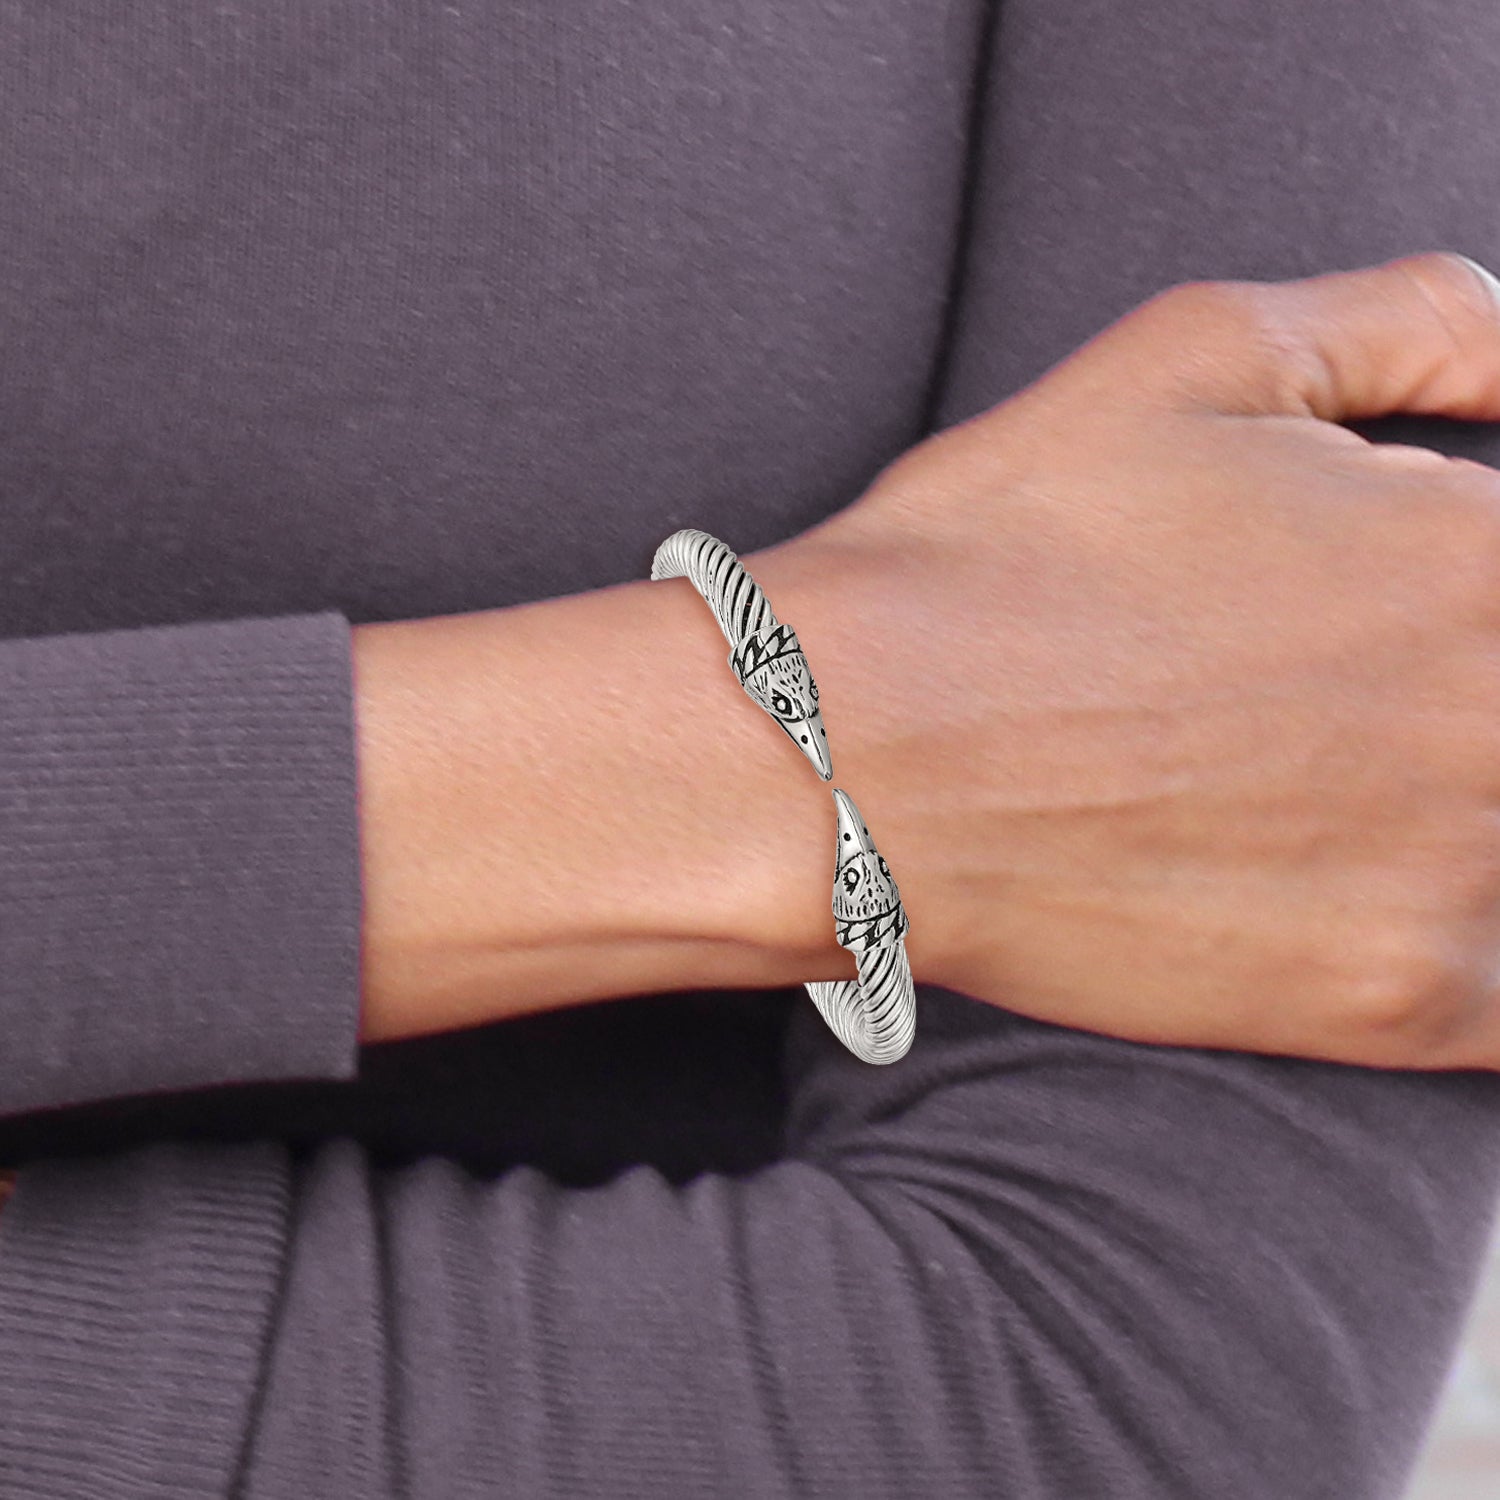 Stainless Steel Antiqued and Polished Eagle Cuff Bangle